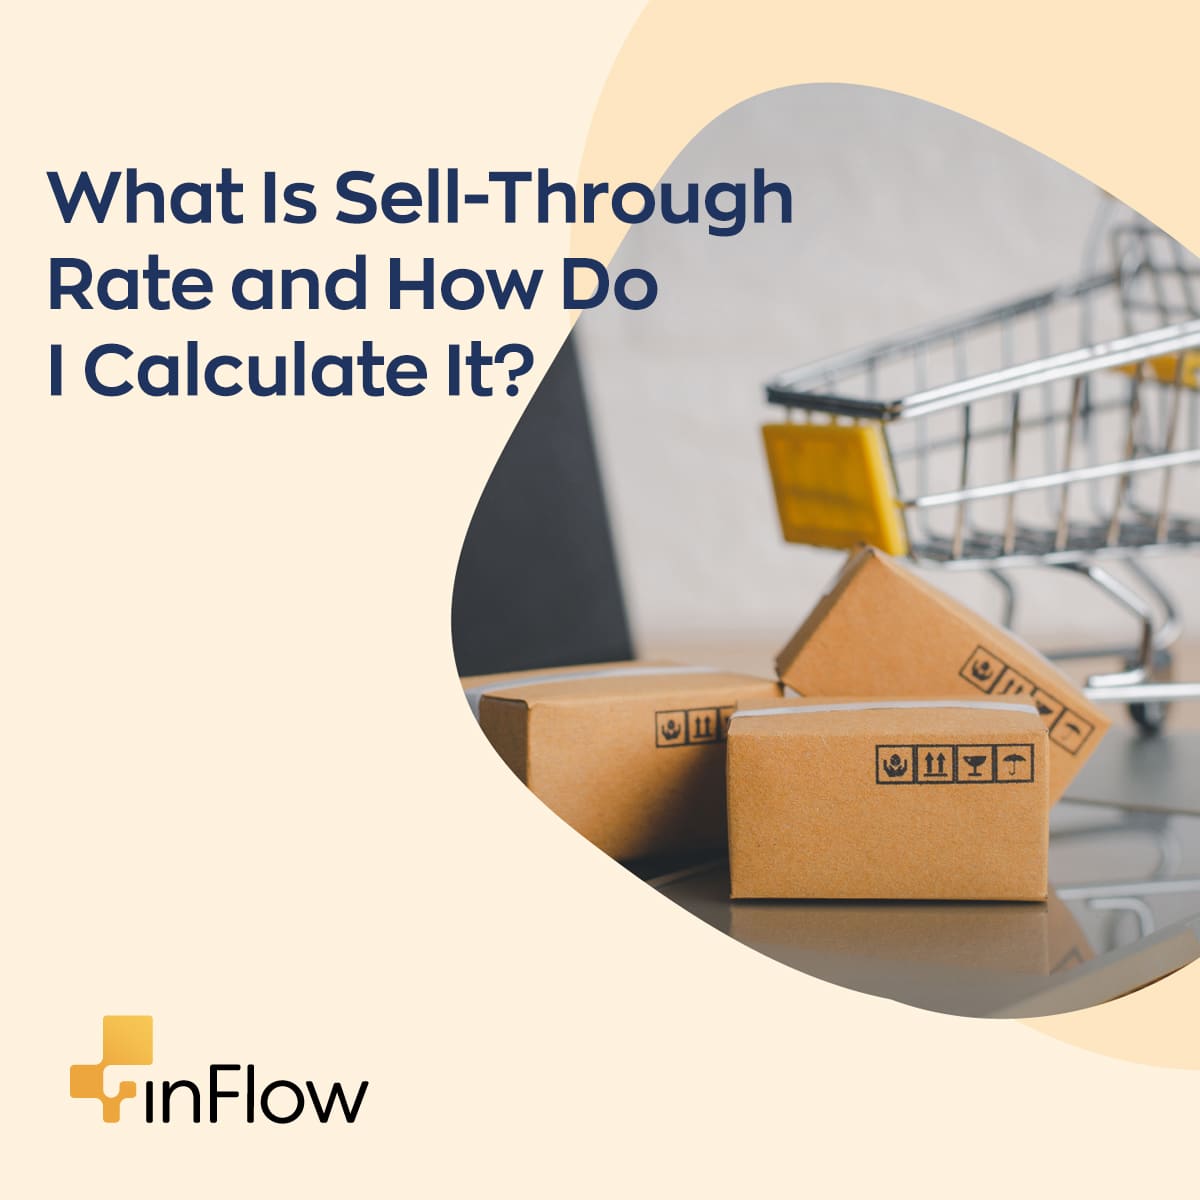 What is sell through rate and how do I calculate it